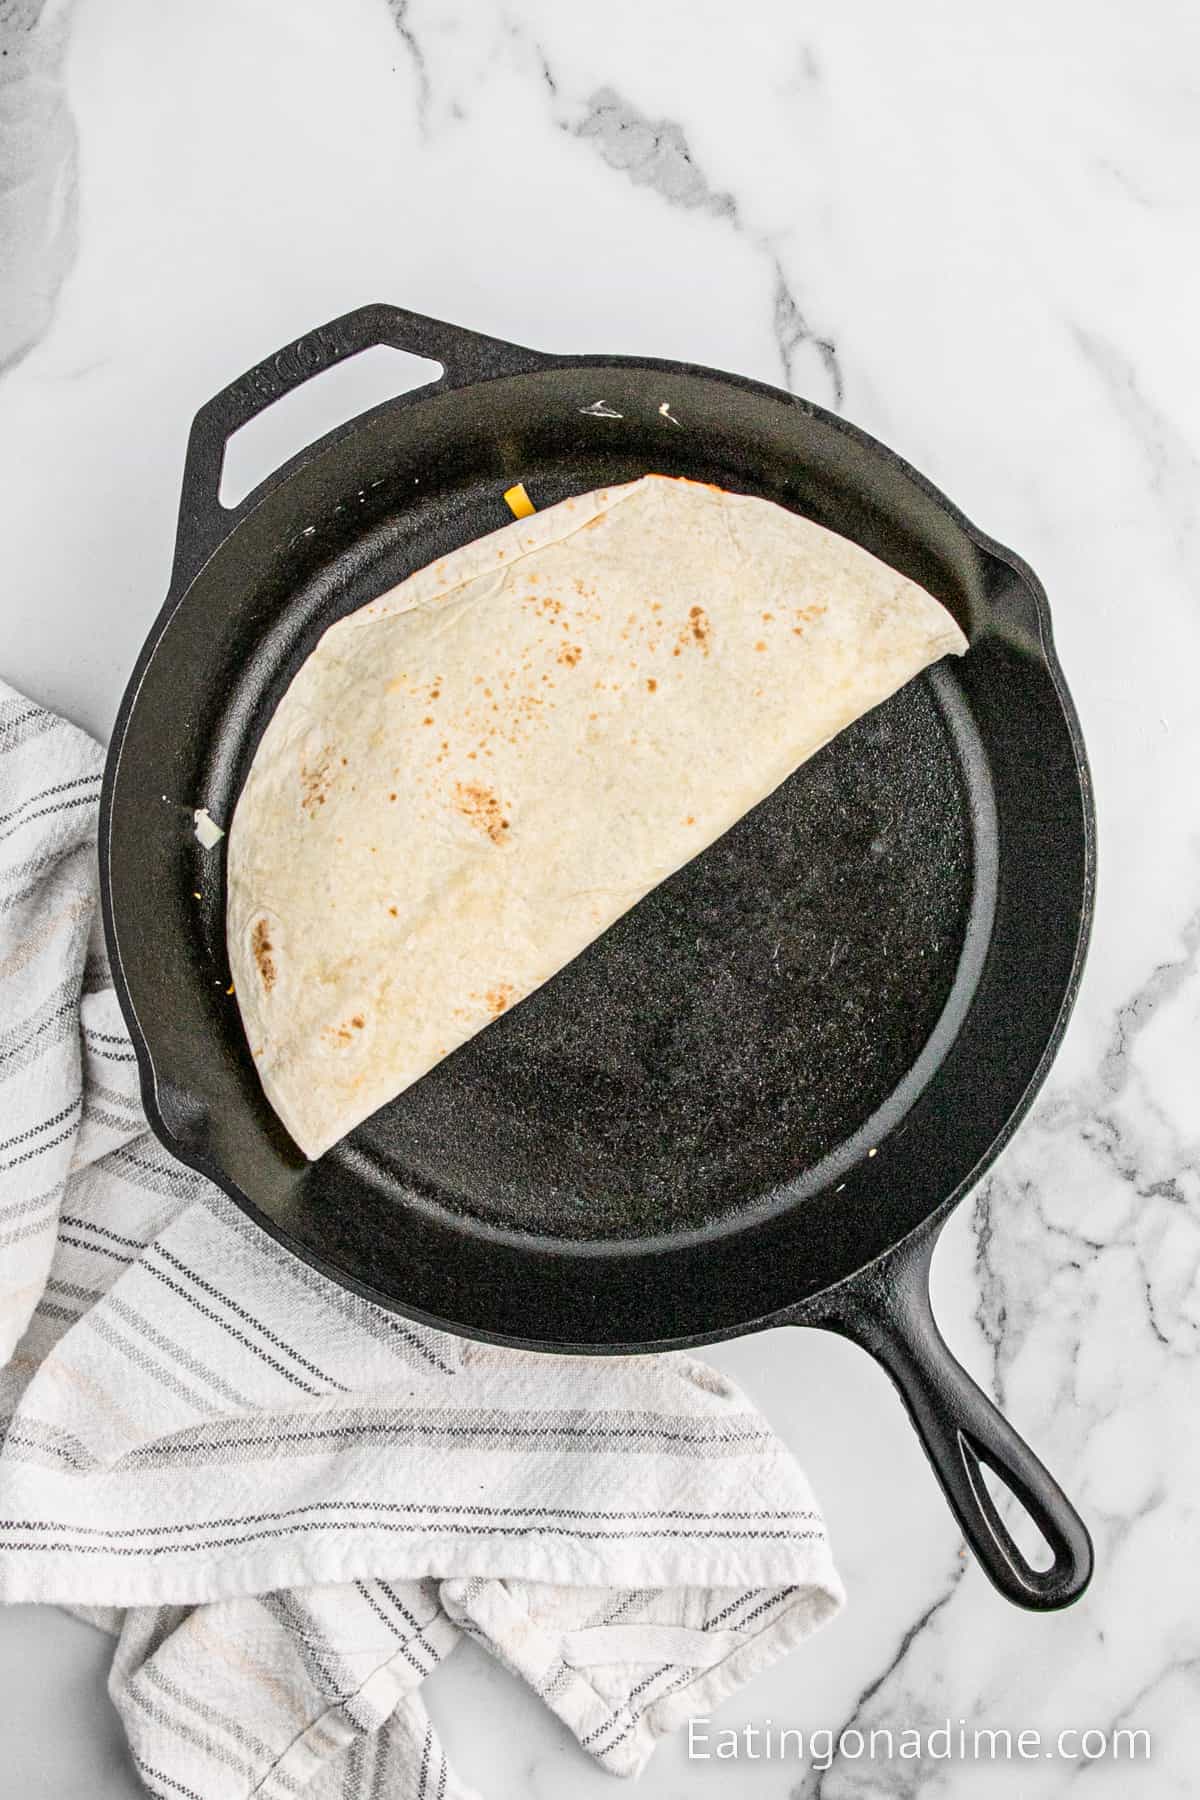 Folded tortilla in a cast iron skillet